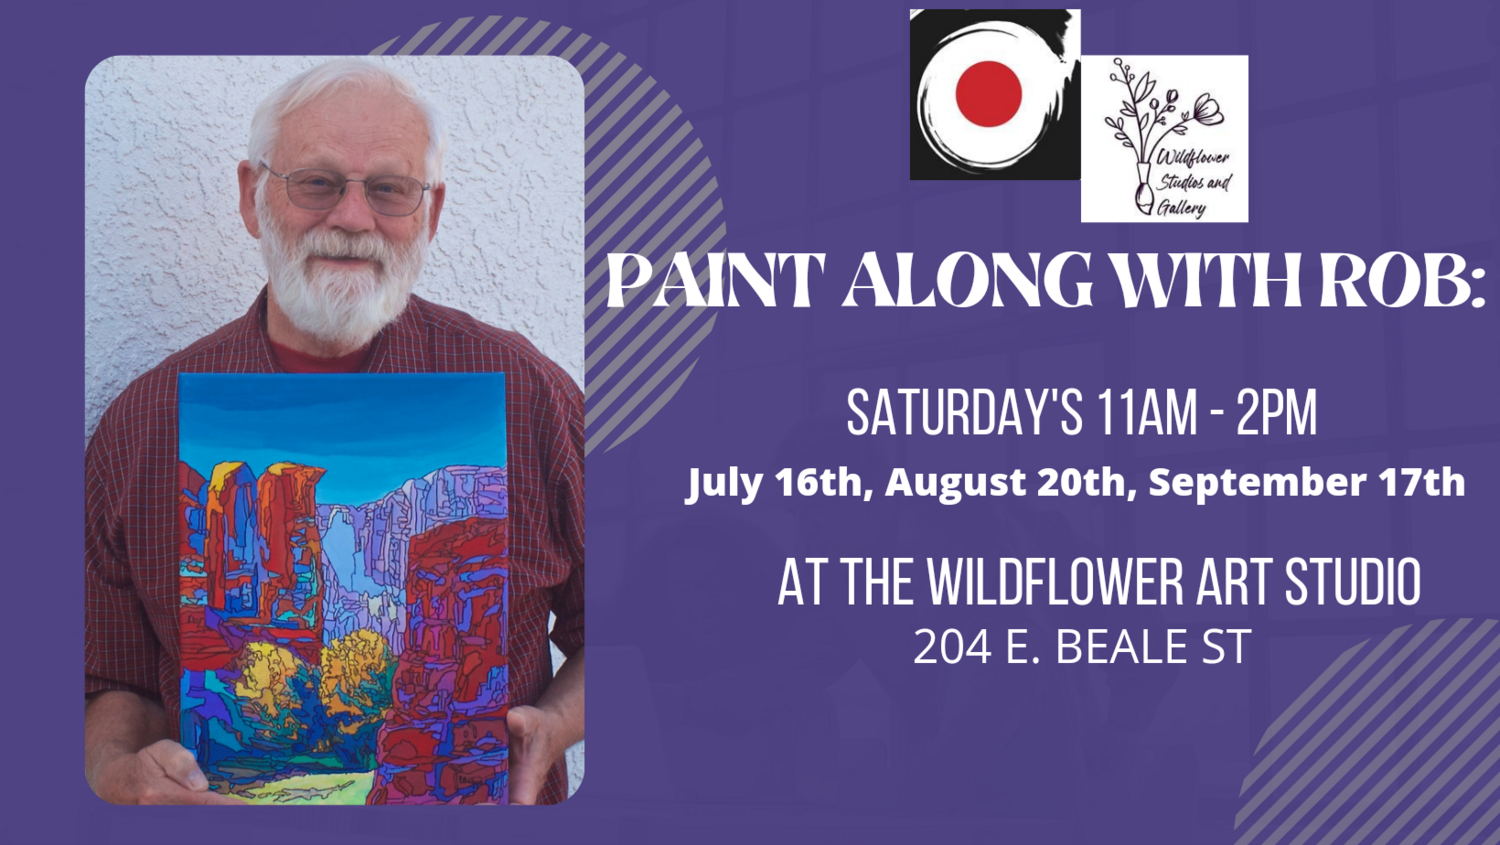 Paint Along with Rob 9/17